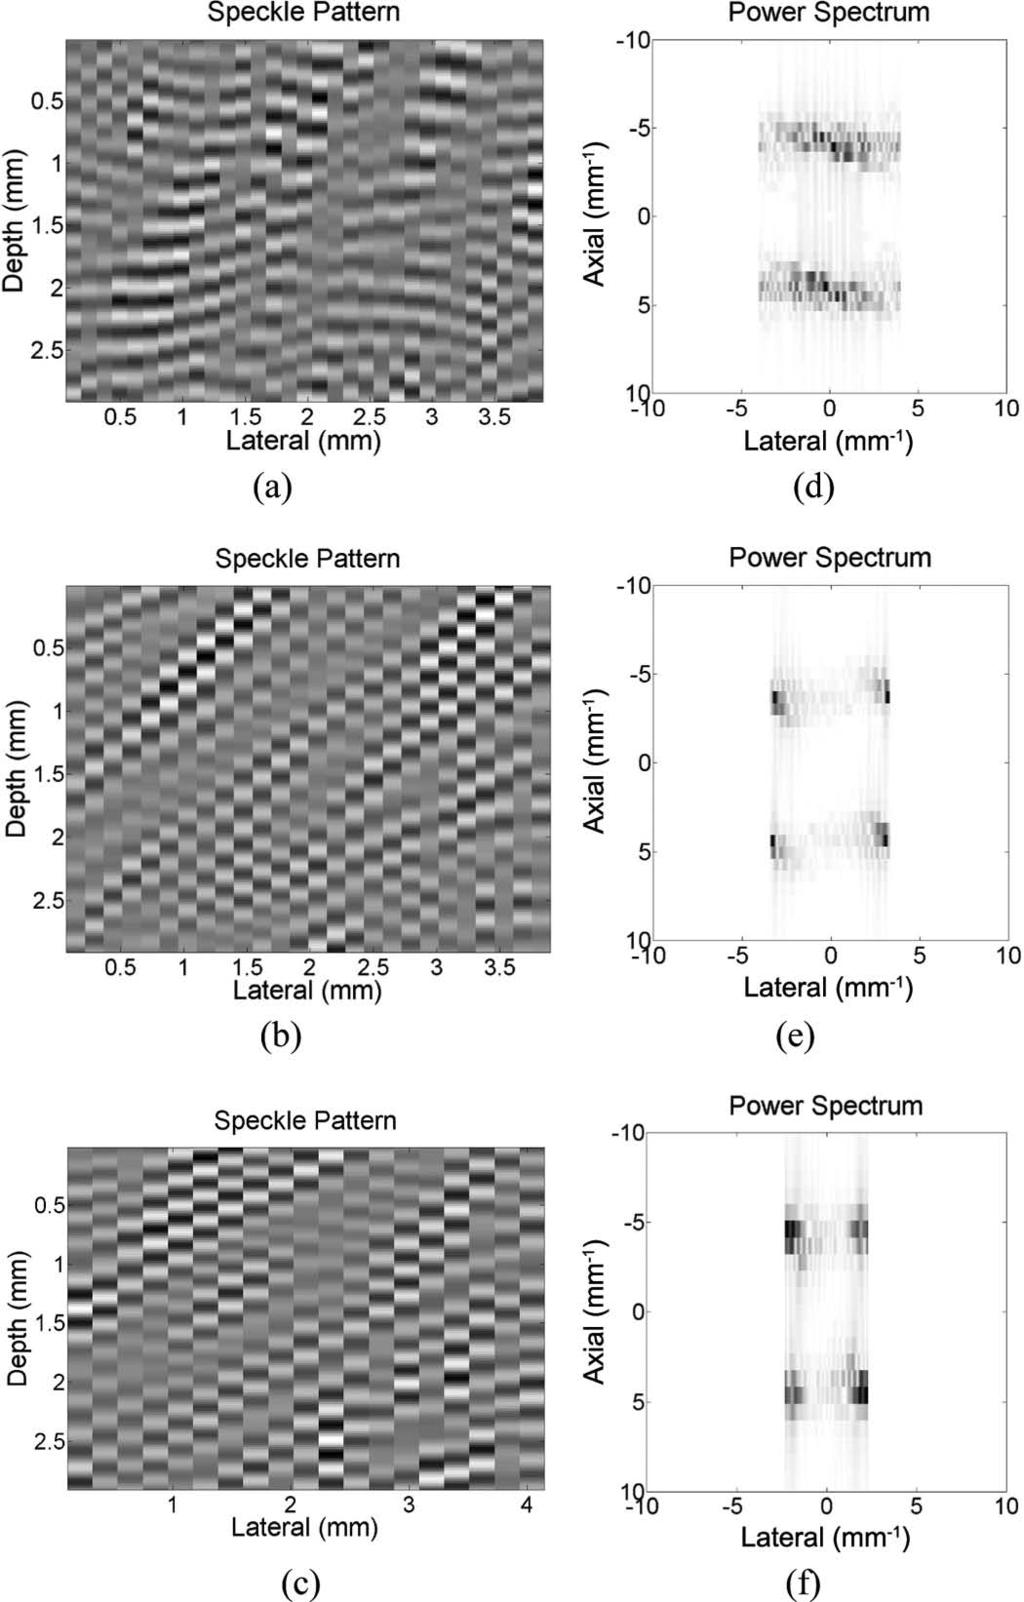 The power spectrum of the speckle pattern: scan velocity is (d) 20 cm/s, (e) 50 cm/s, and (f) 80 cm/s. Simulated plug blood flow with A-line increment equal to onefourth of the lateral beam width.